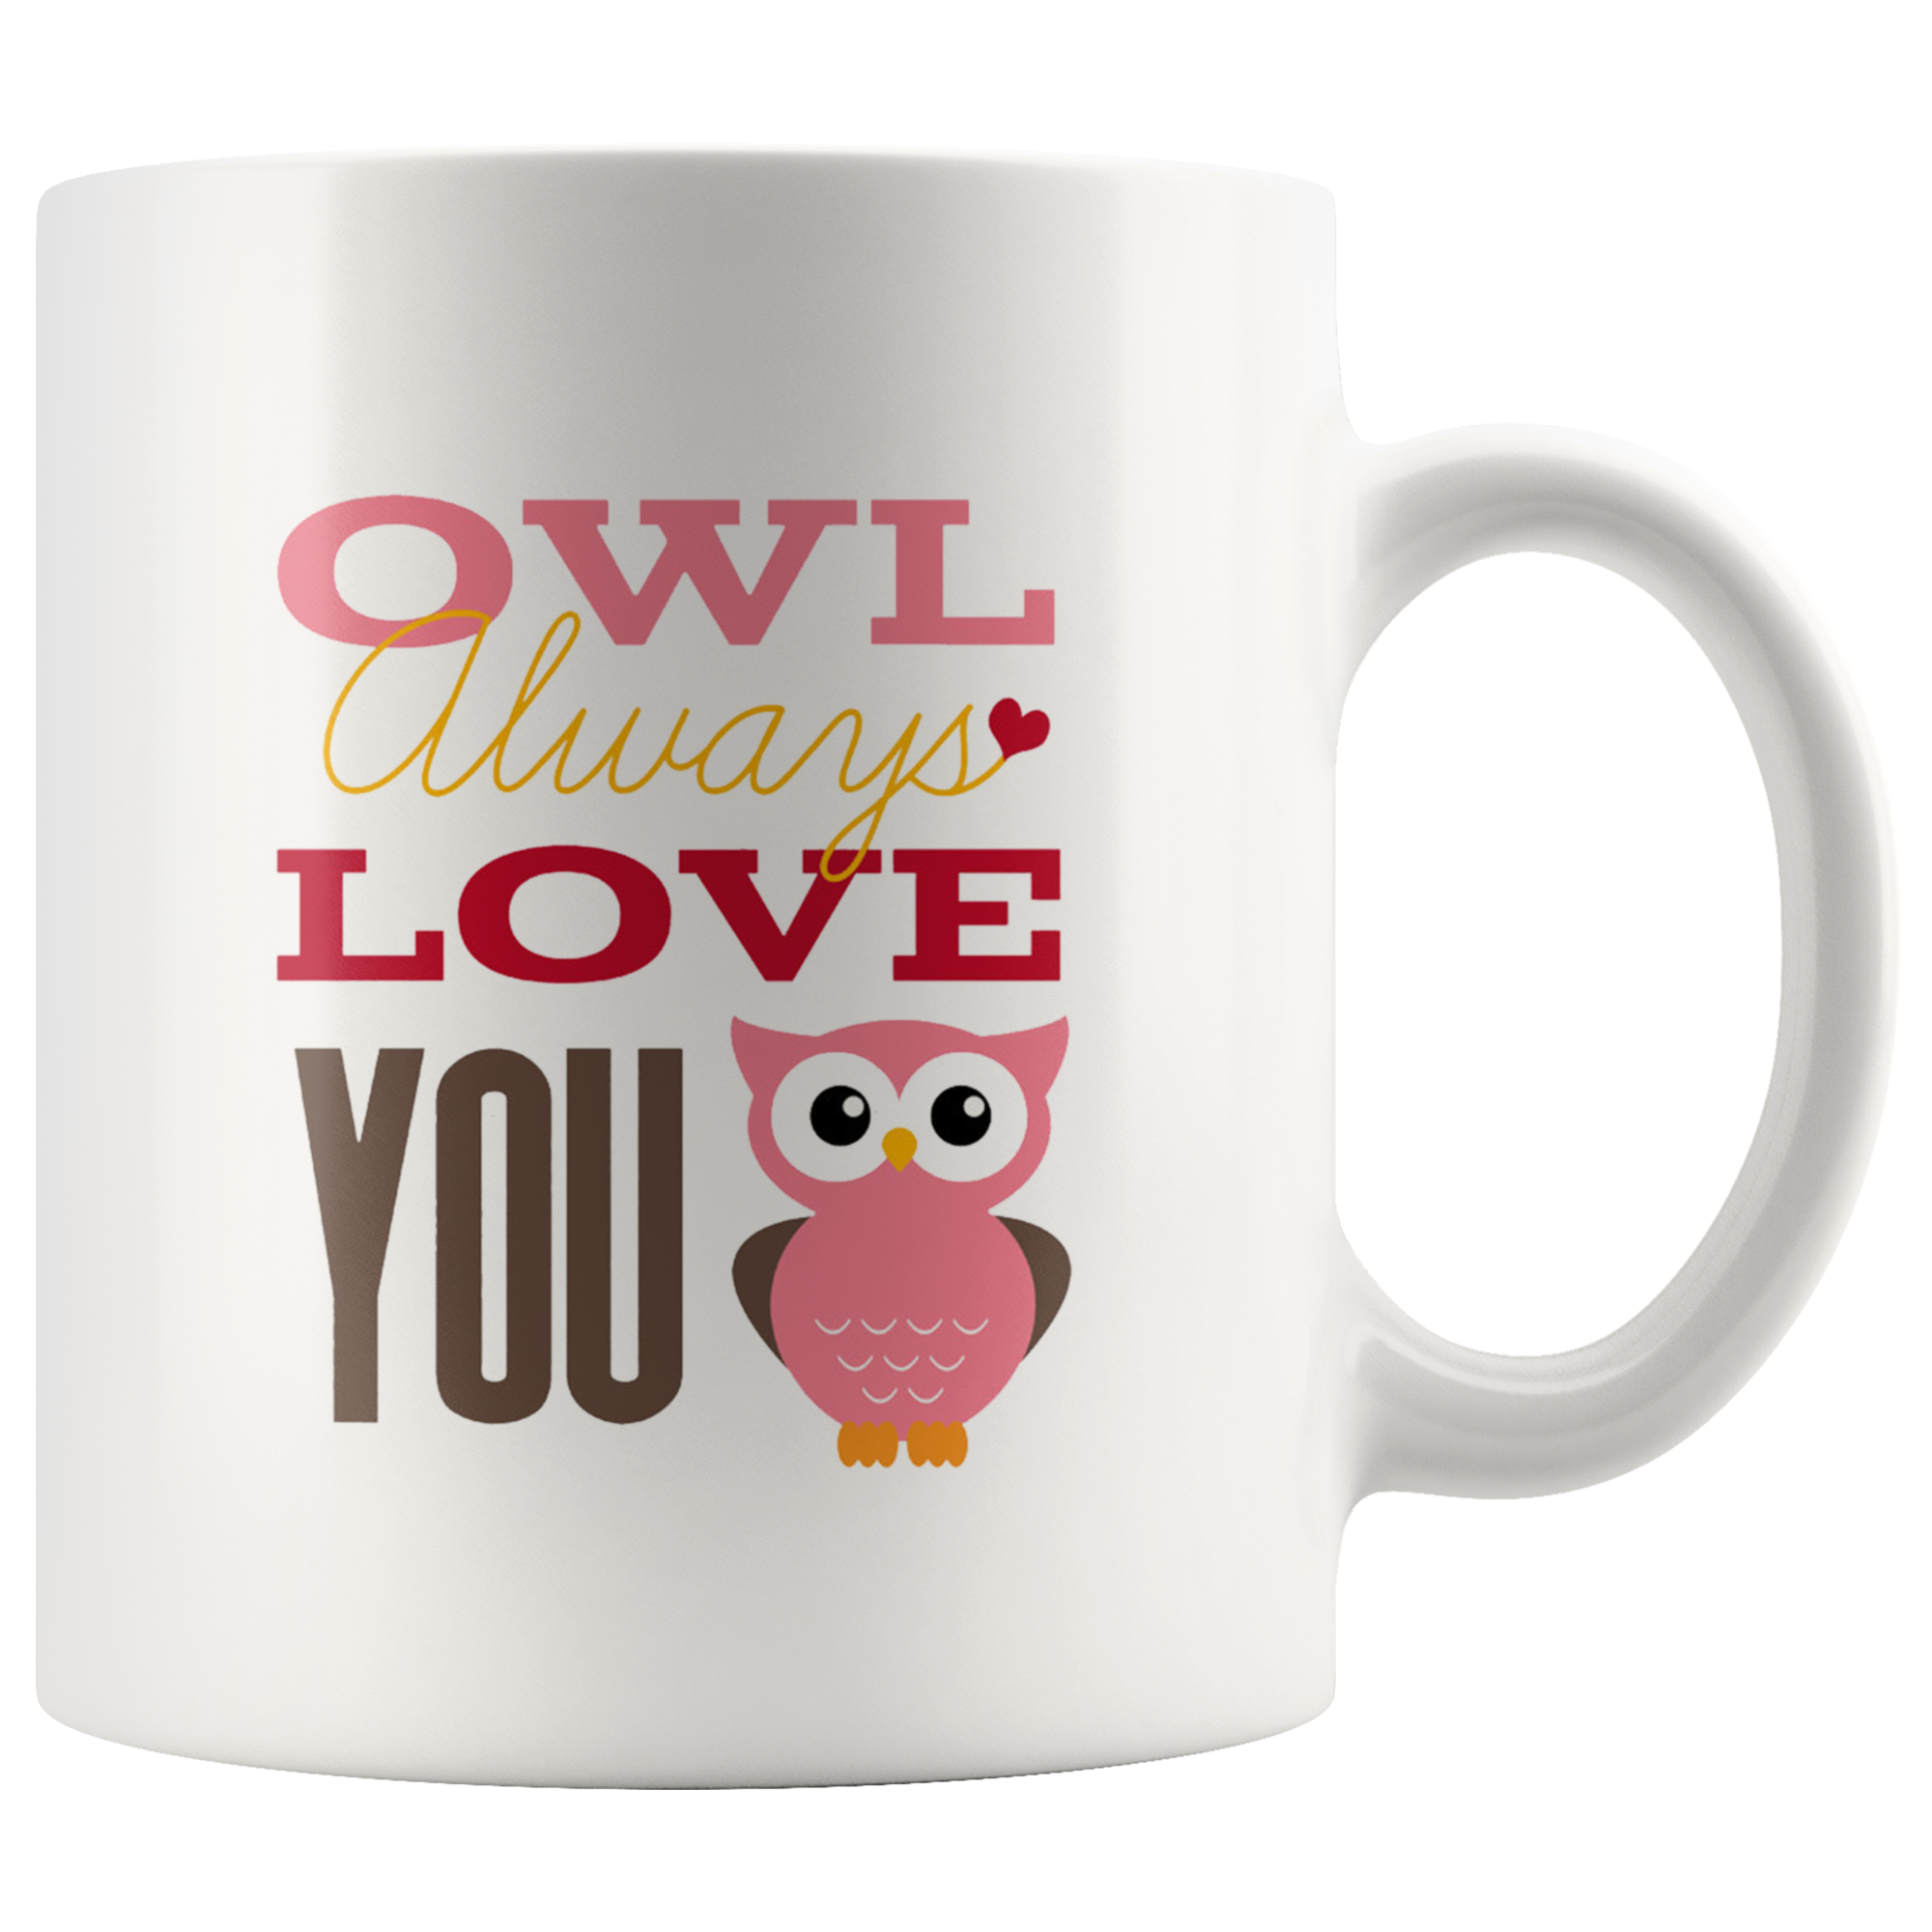 Owl Always Love You - Guestbookery